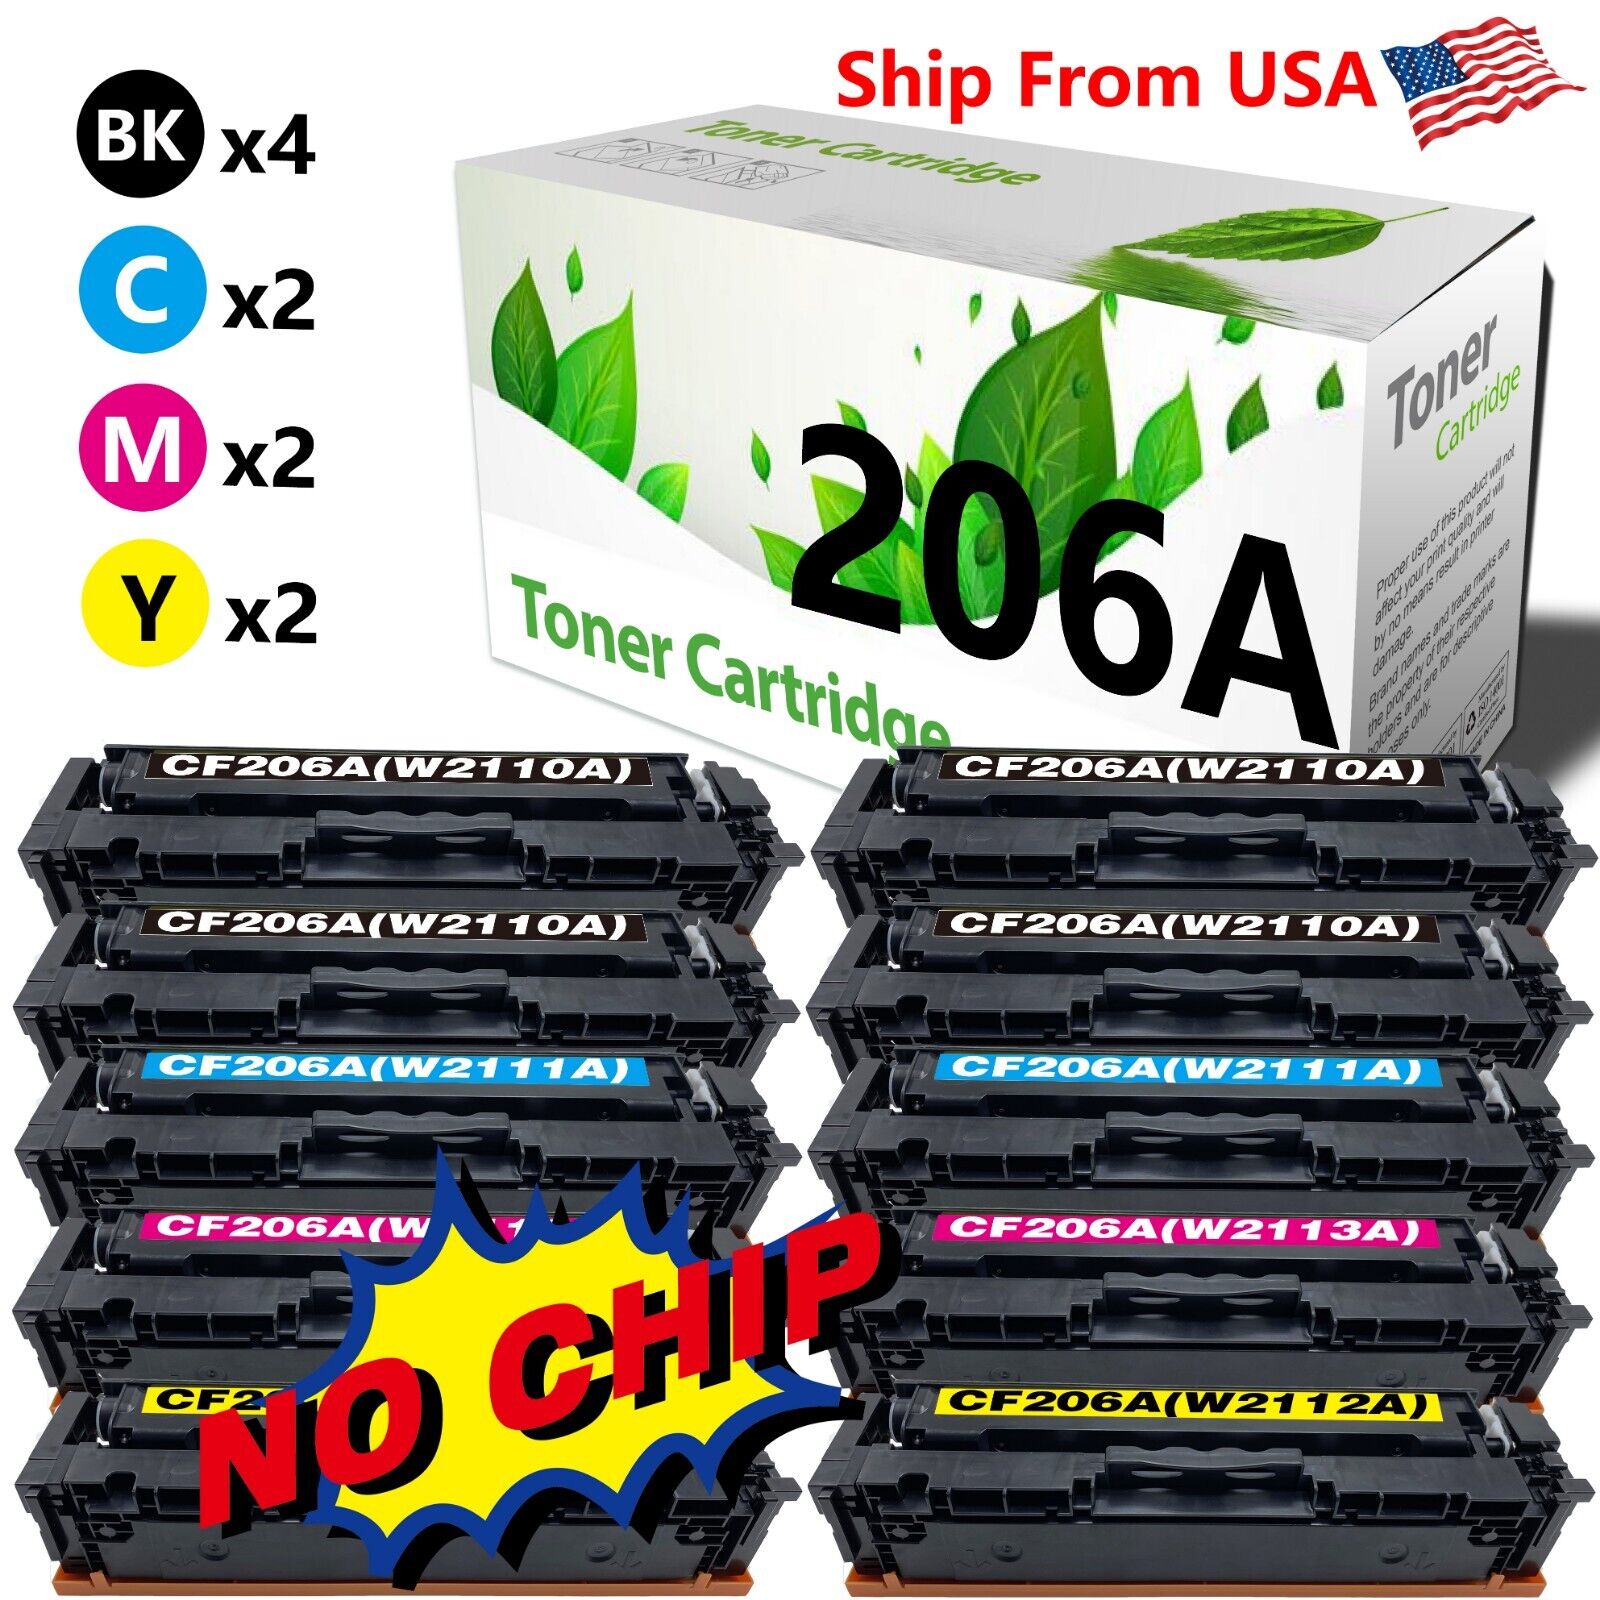 10Pack CF206A Toner Cartridges W2110A-13A no chip for M255nw M282nw M283fdn